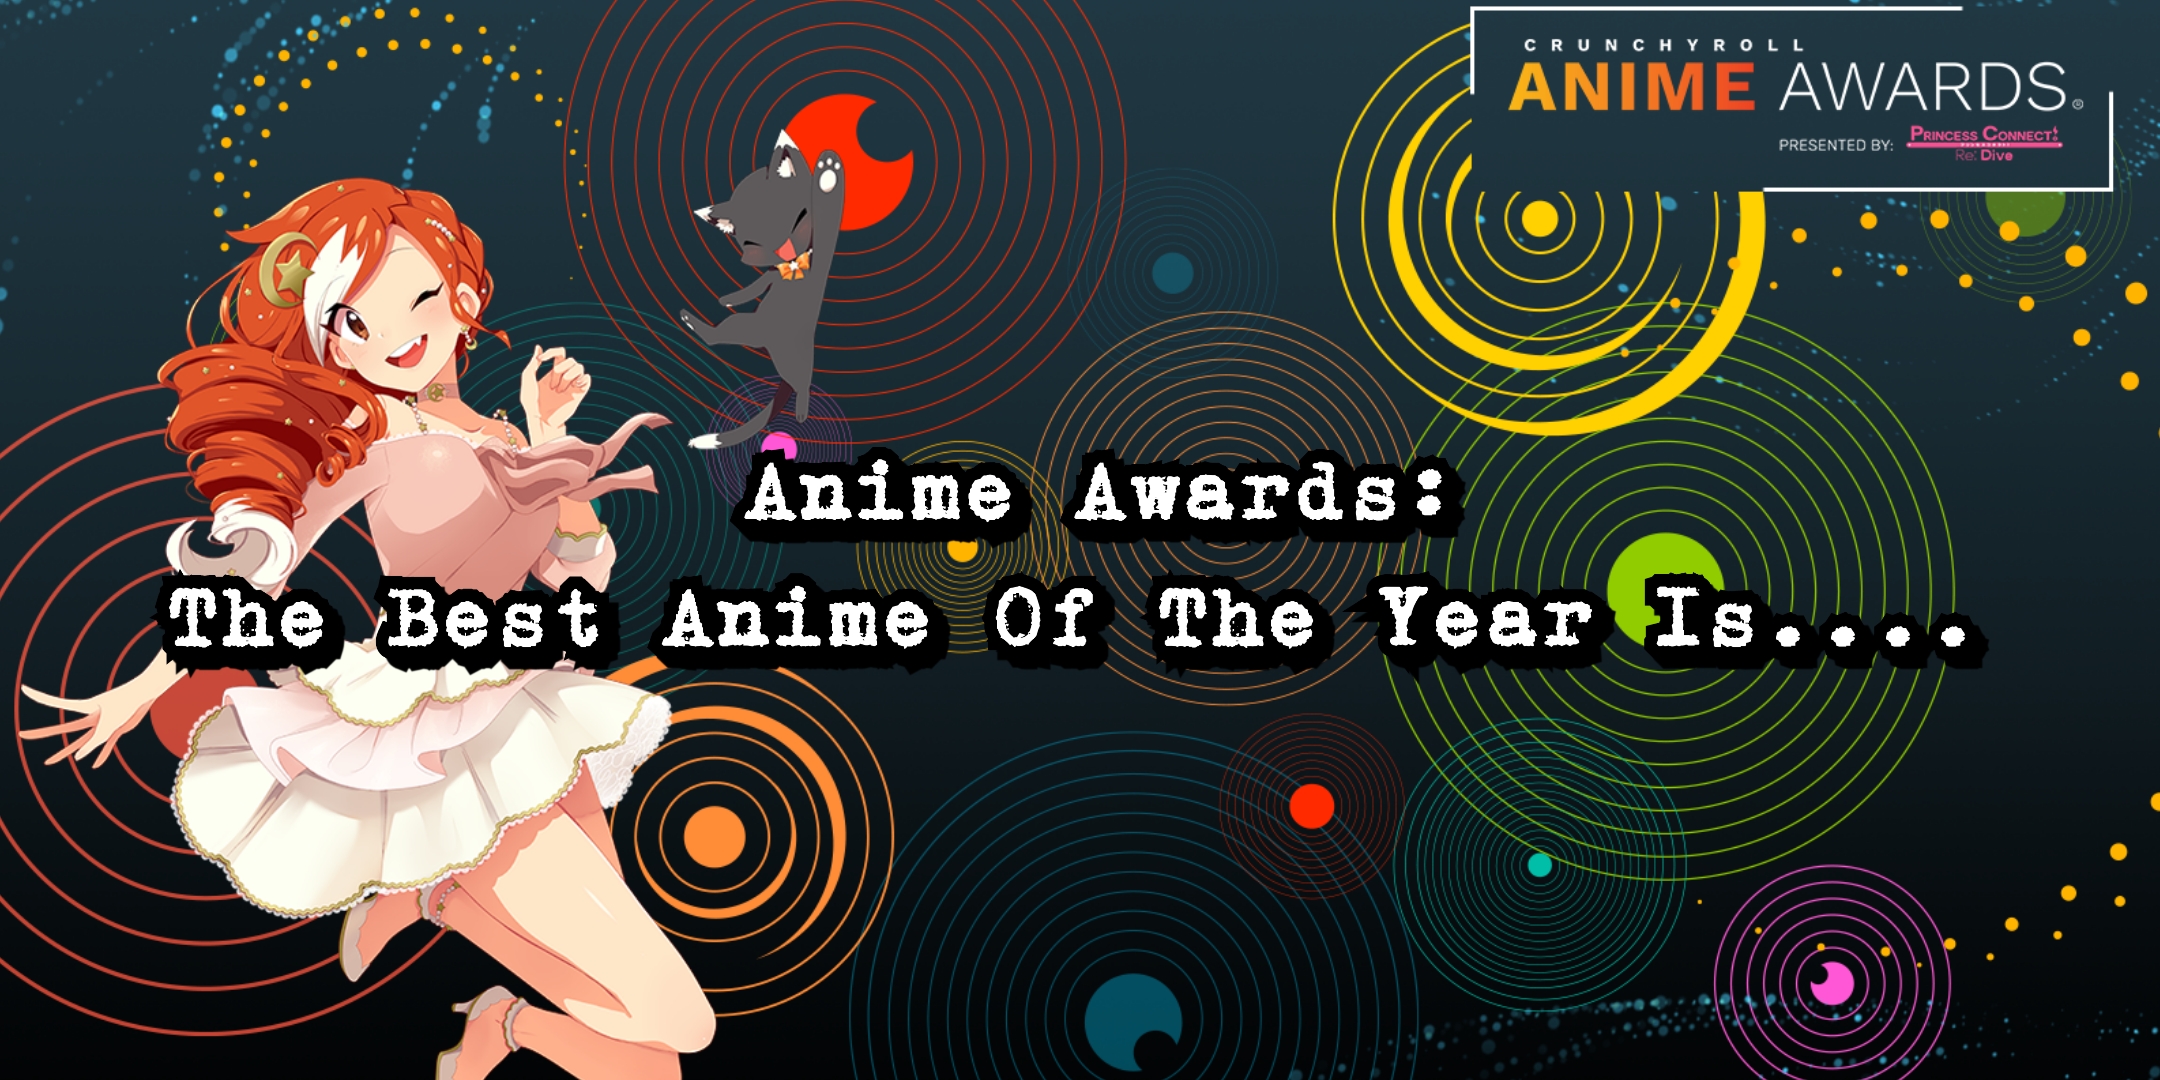 Best Anime Opening - Best of 2016 Awards Guide - IGN